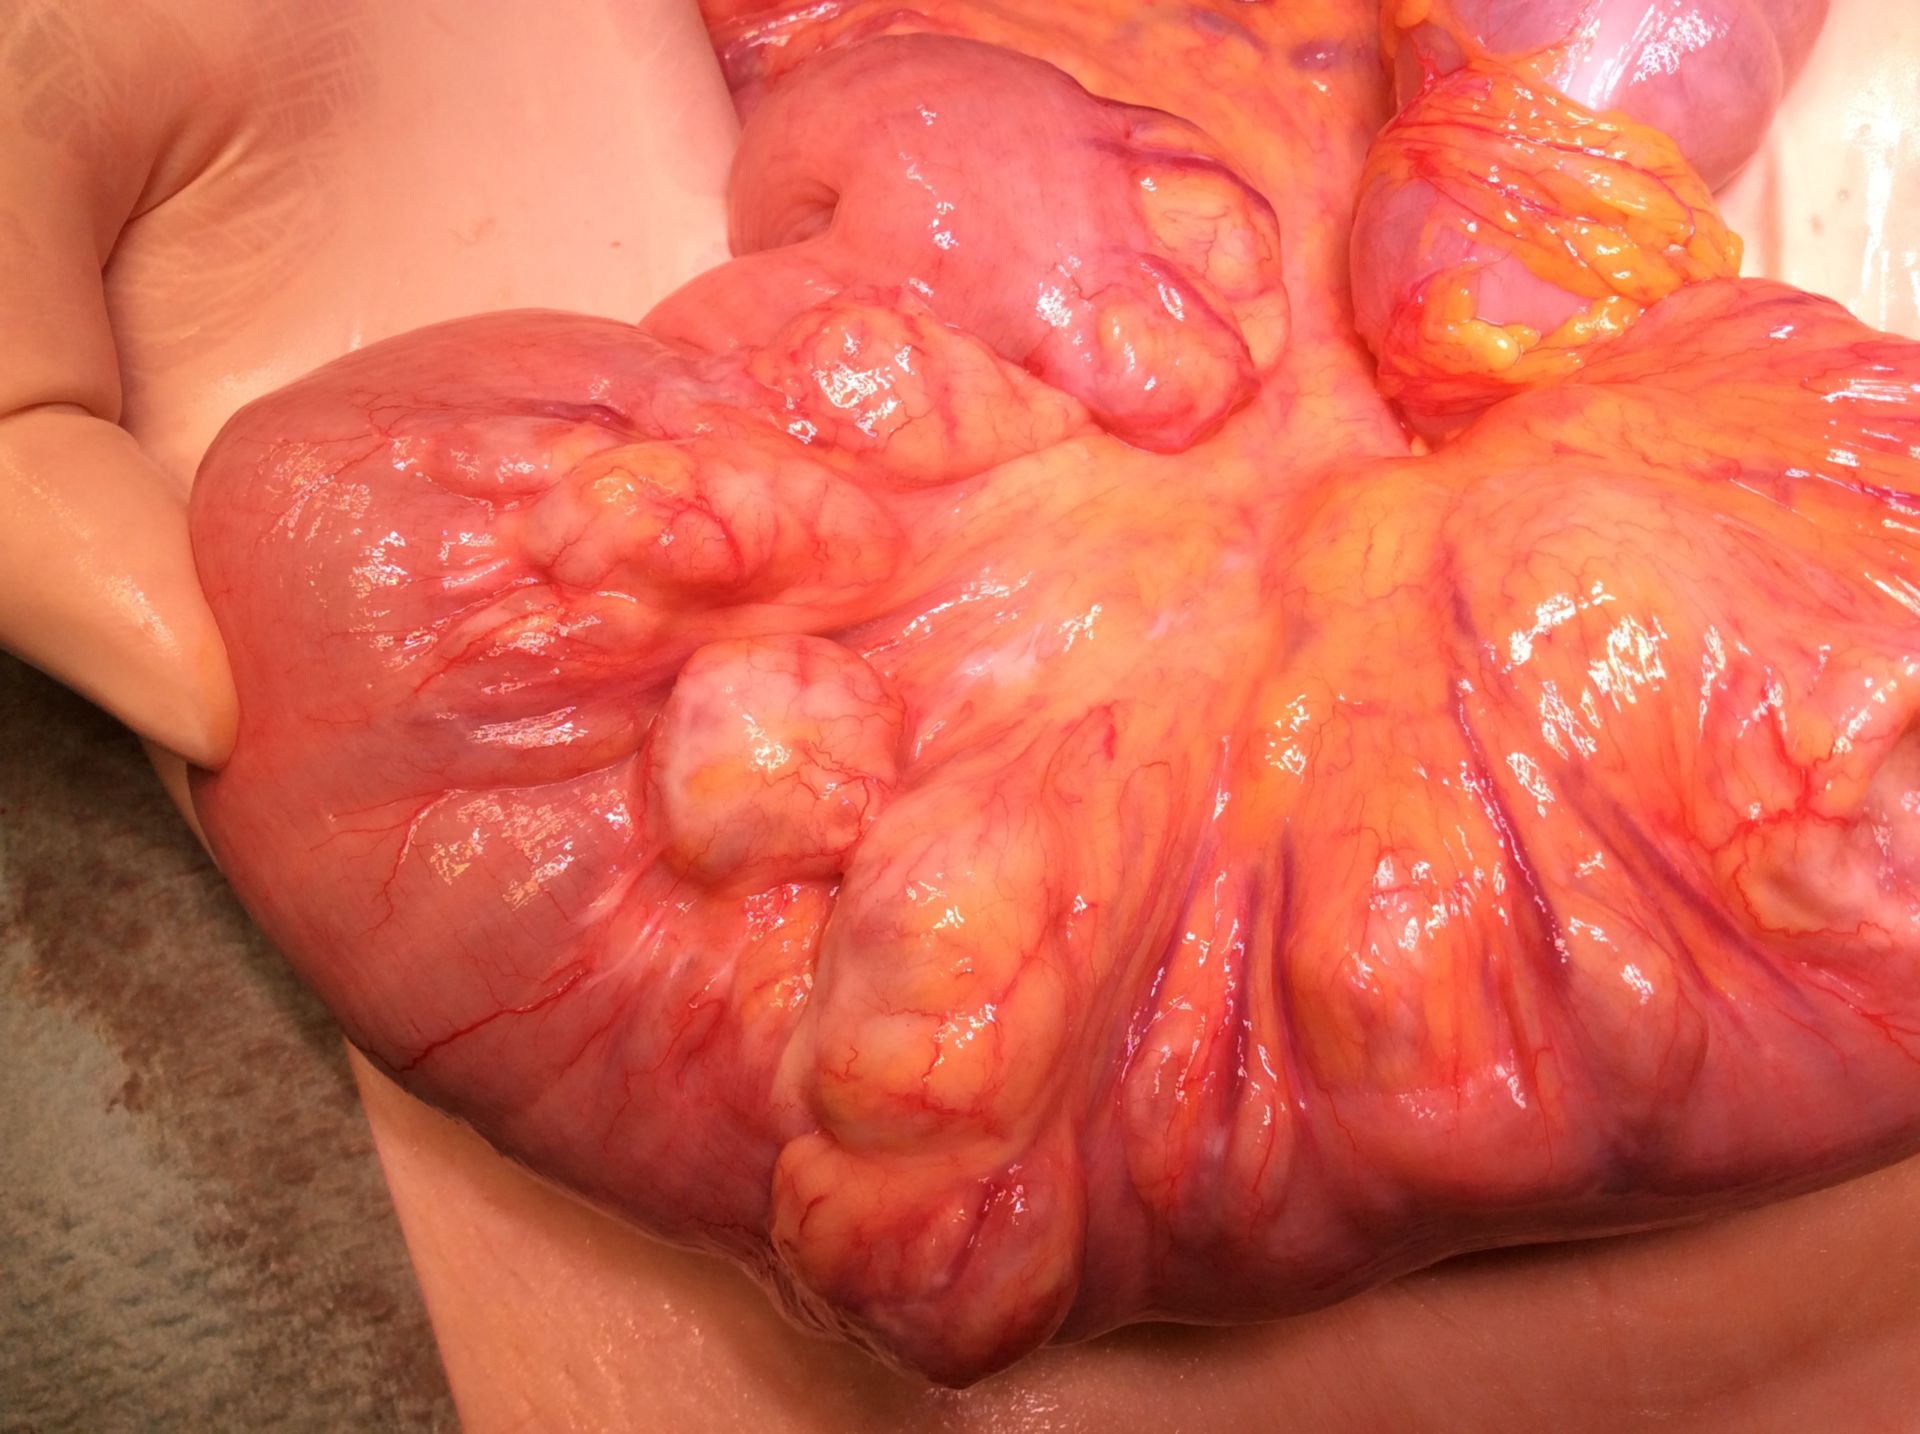 Massive diverticula of small intestine with inflammation (4)